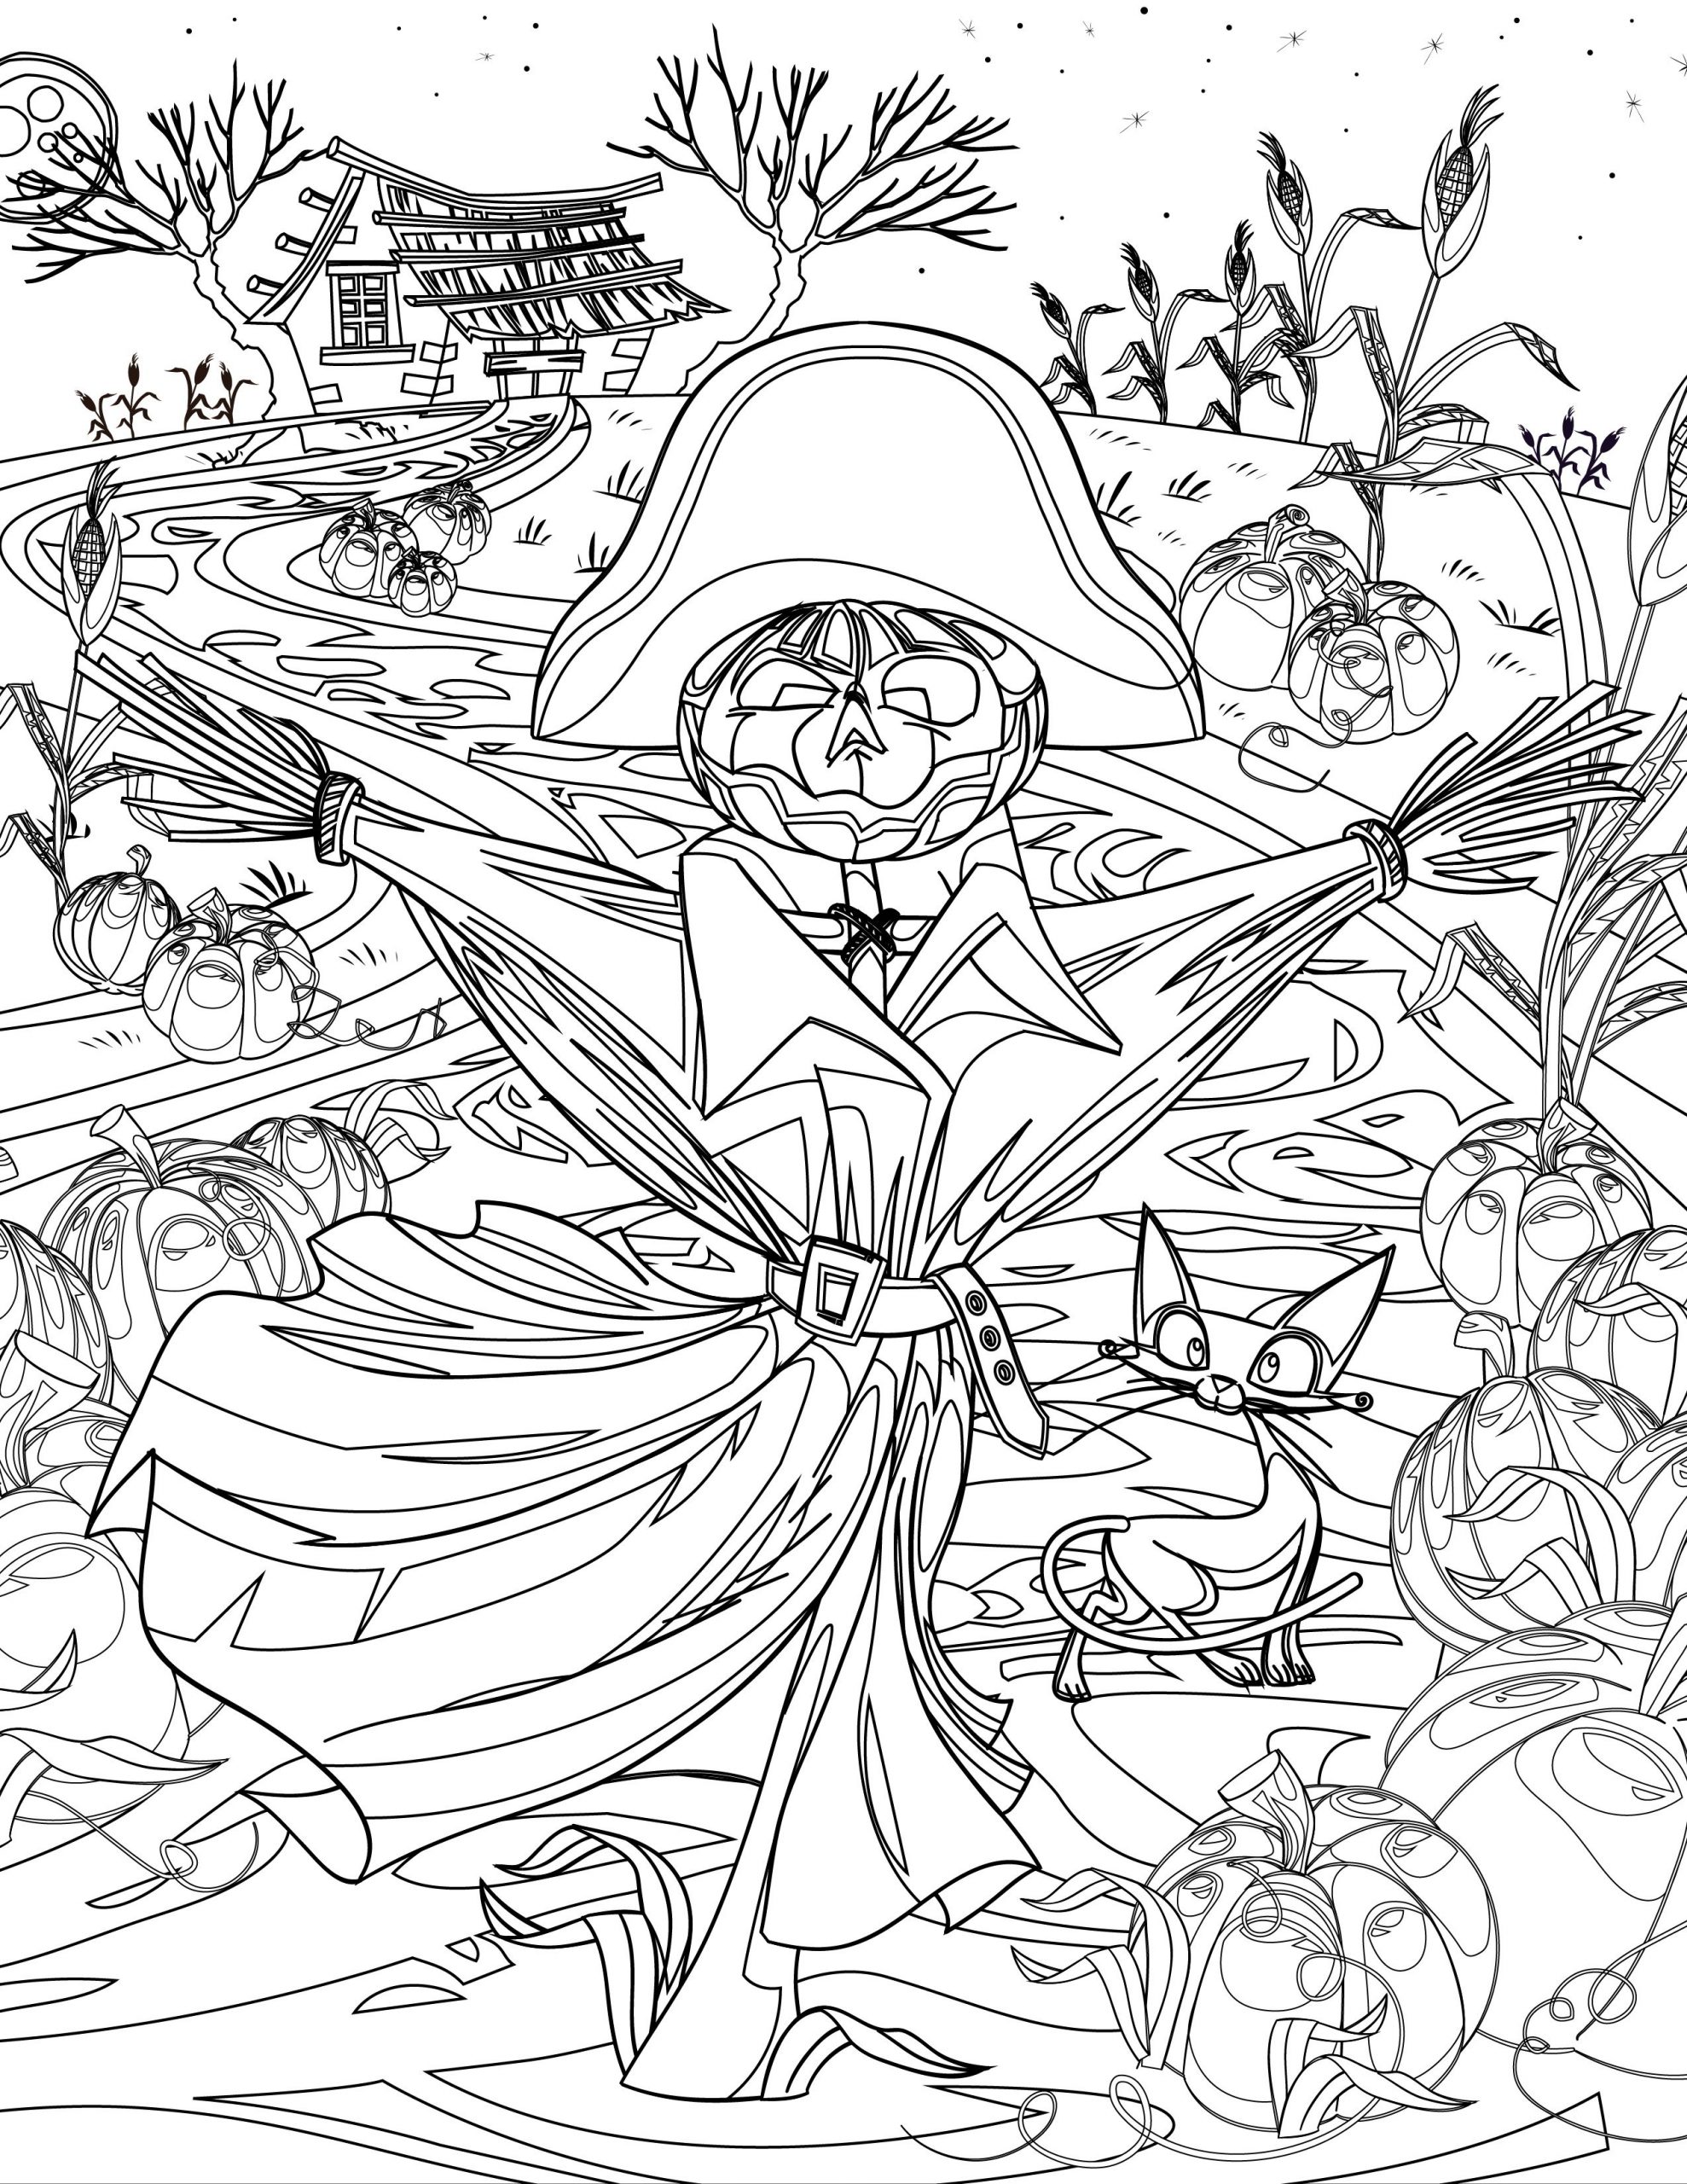 Pin On Coloriages D'Halloween Coloring Pages tout Coloriage D Haloween